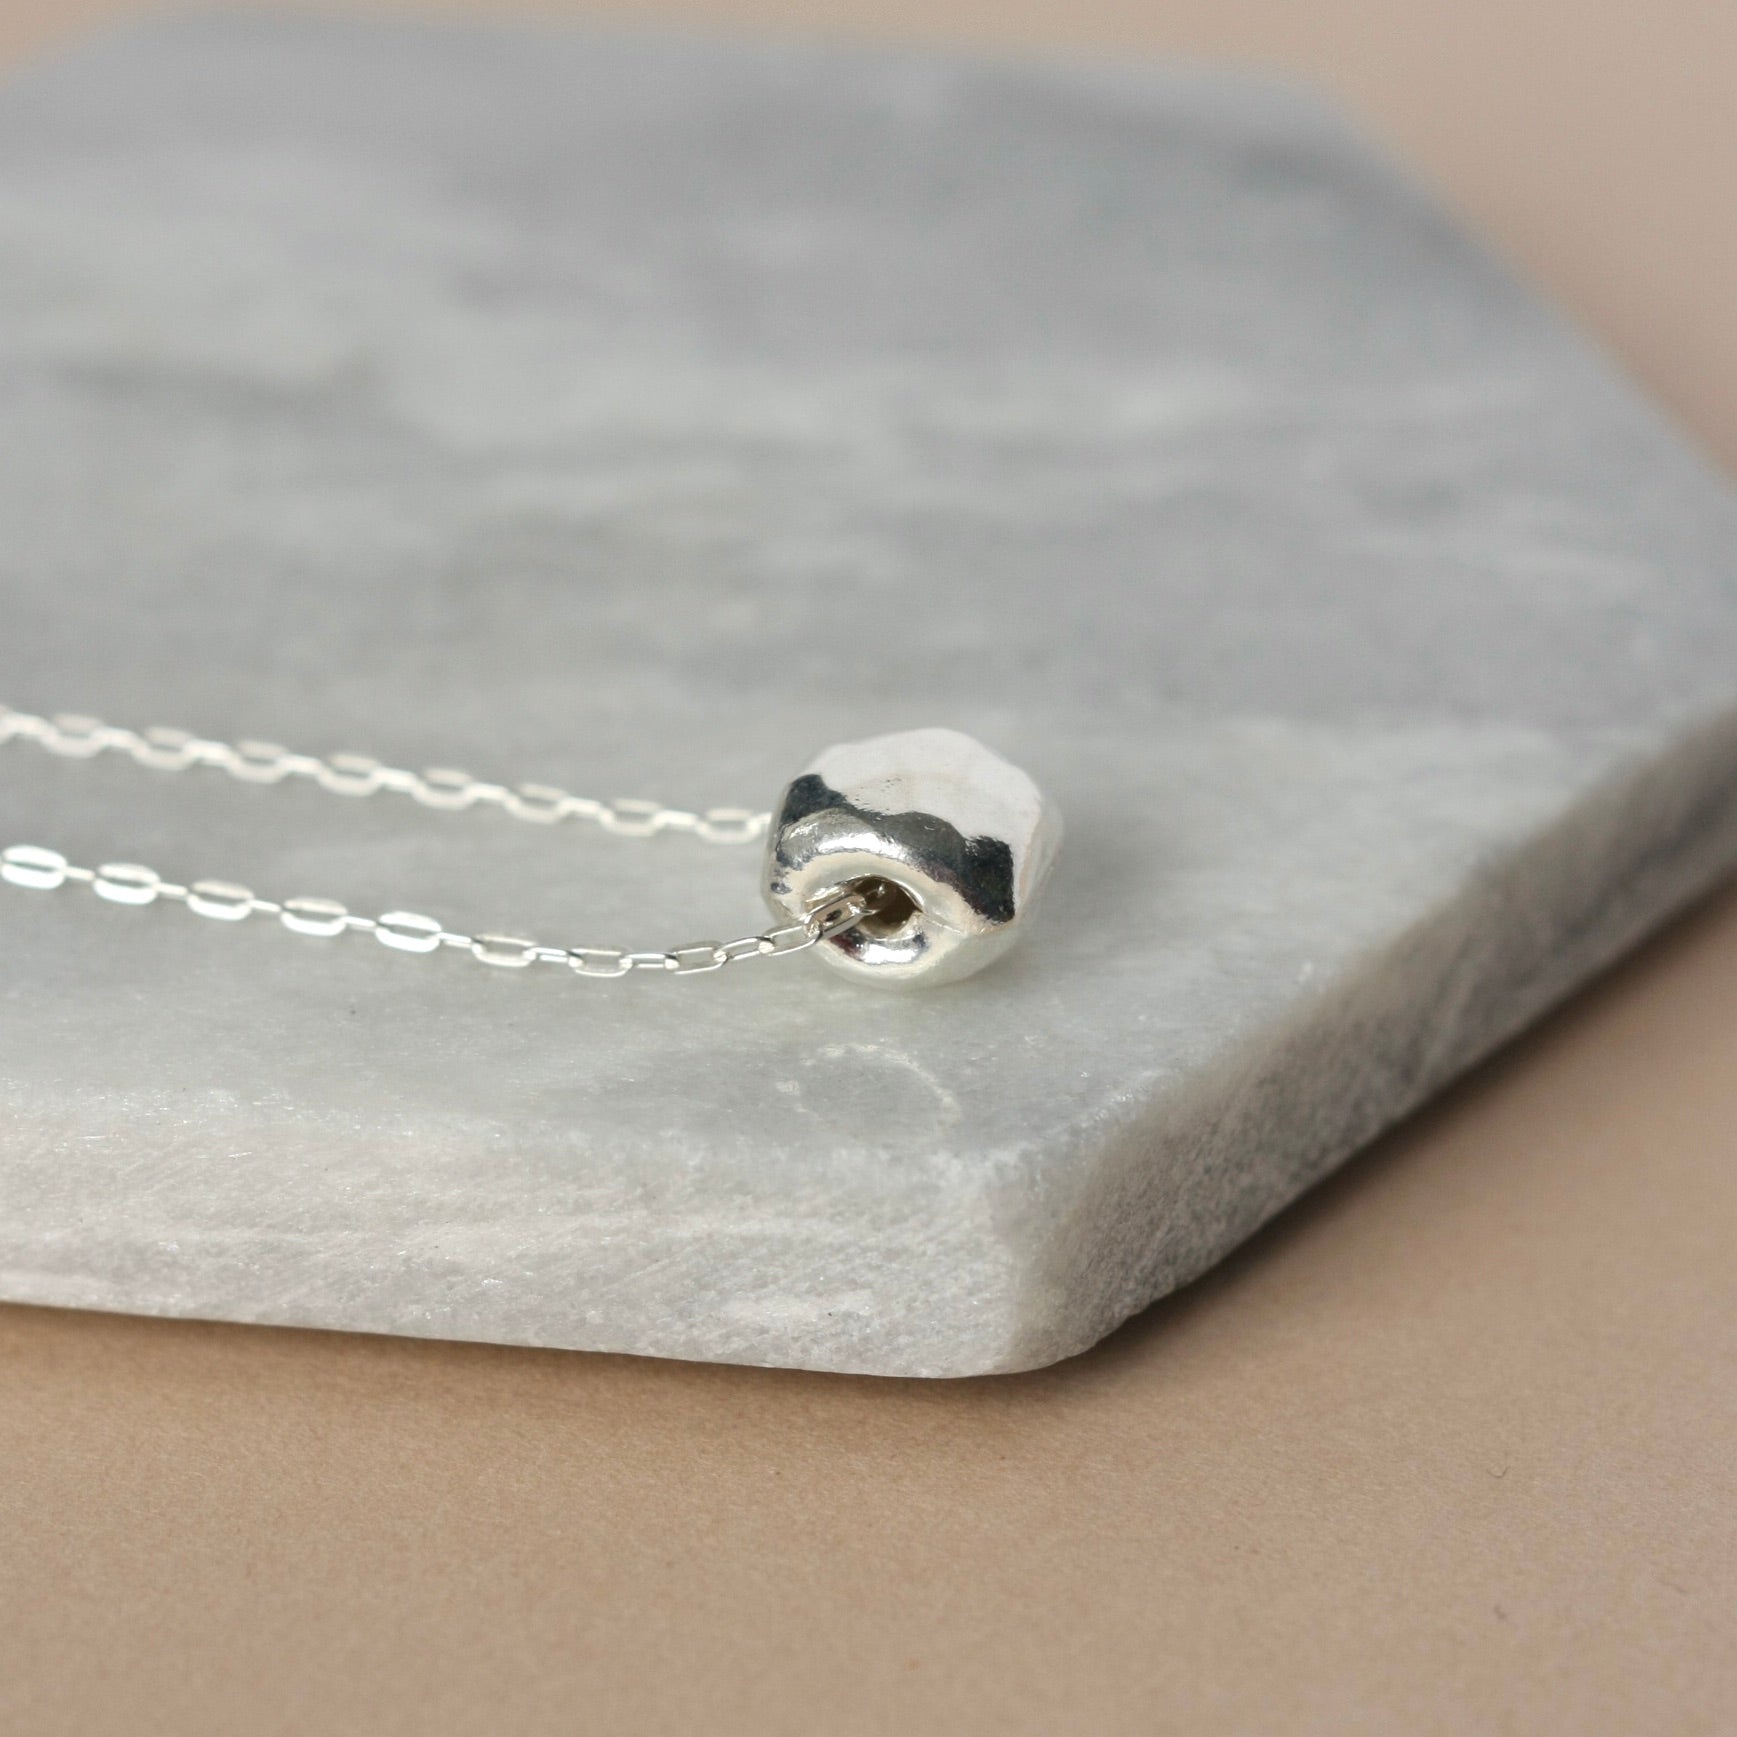 Hammered Sterling Silver Geometric Square Pendant Necklace